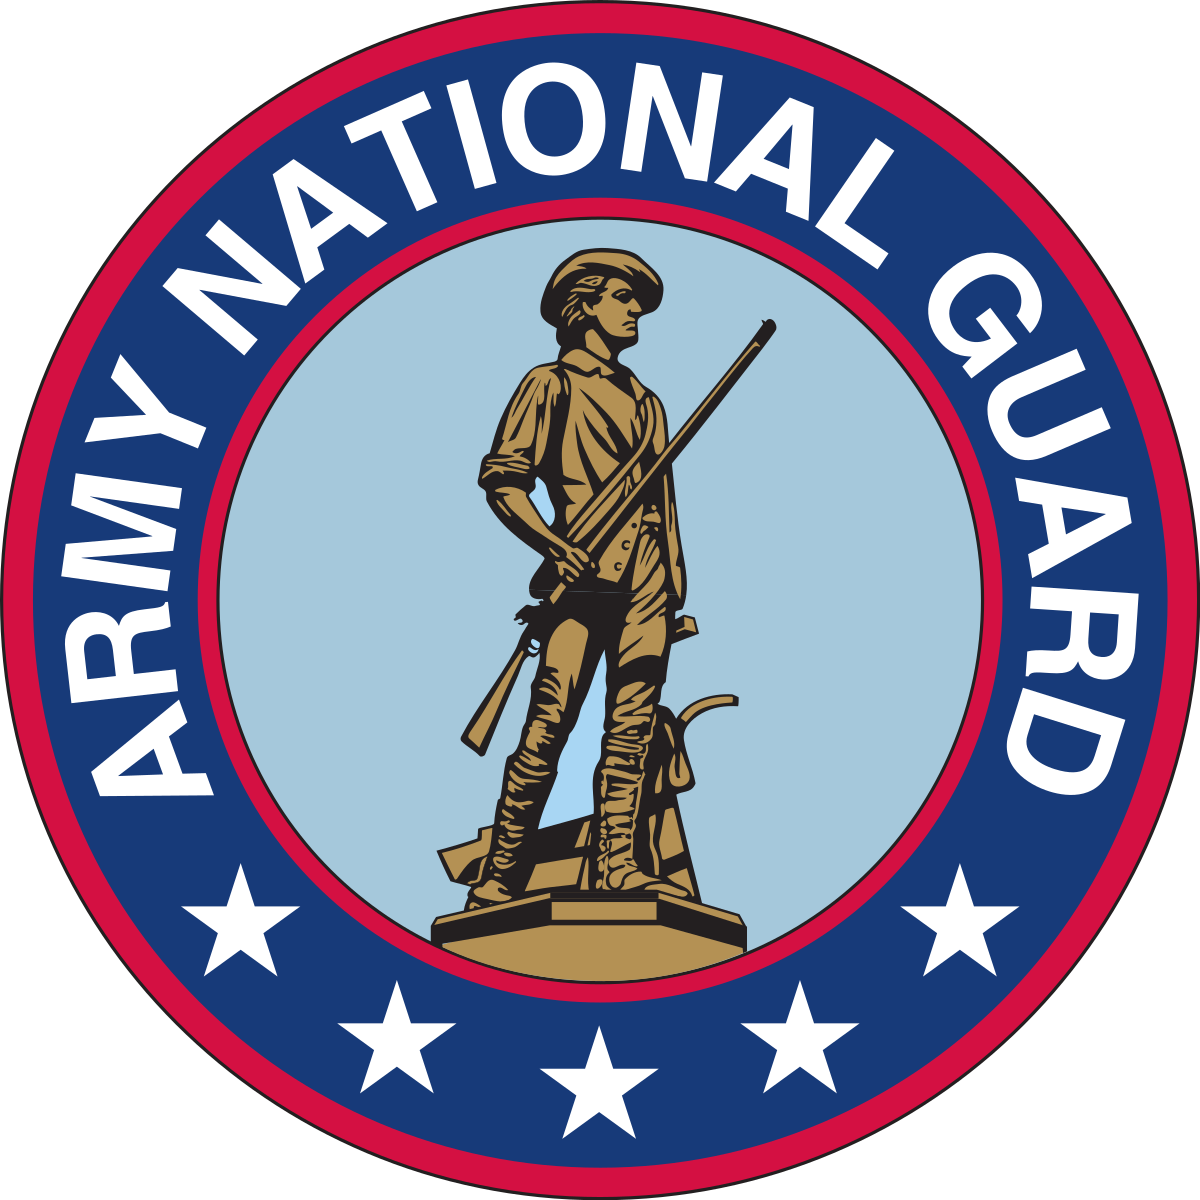 https://midicareers.com/wp-content/uploads/2023/02/1200px-Seal_of_the_United_States_Army_National_Guard.svg.png